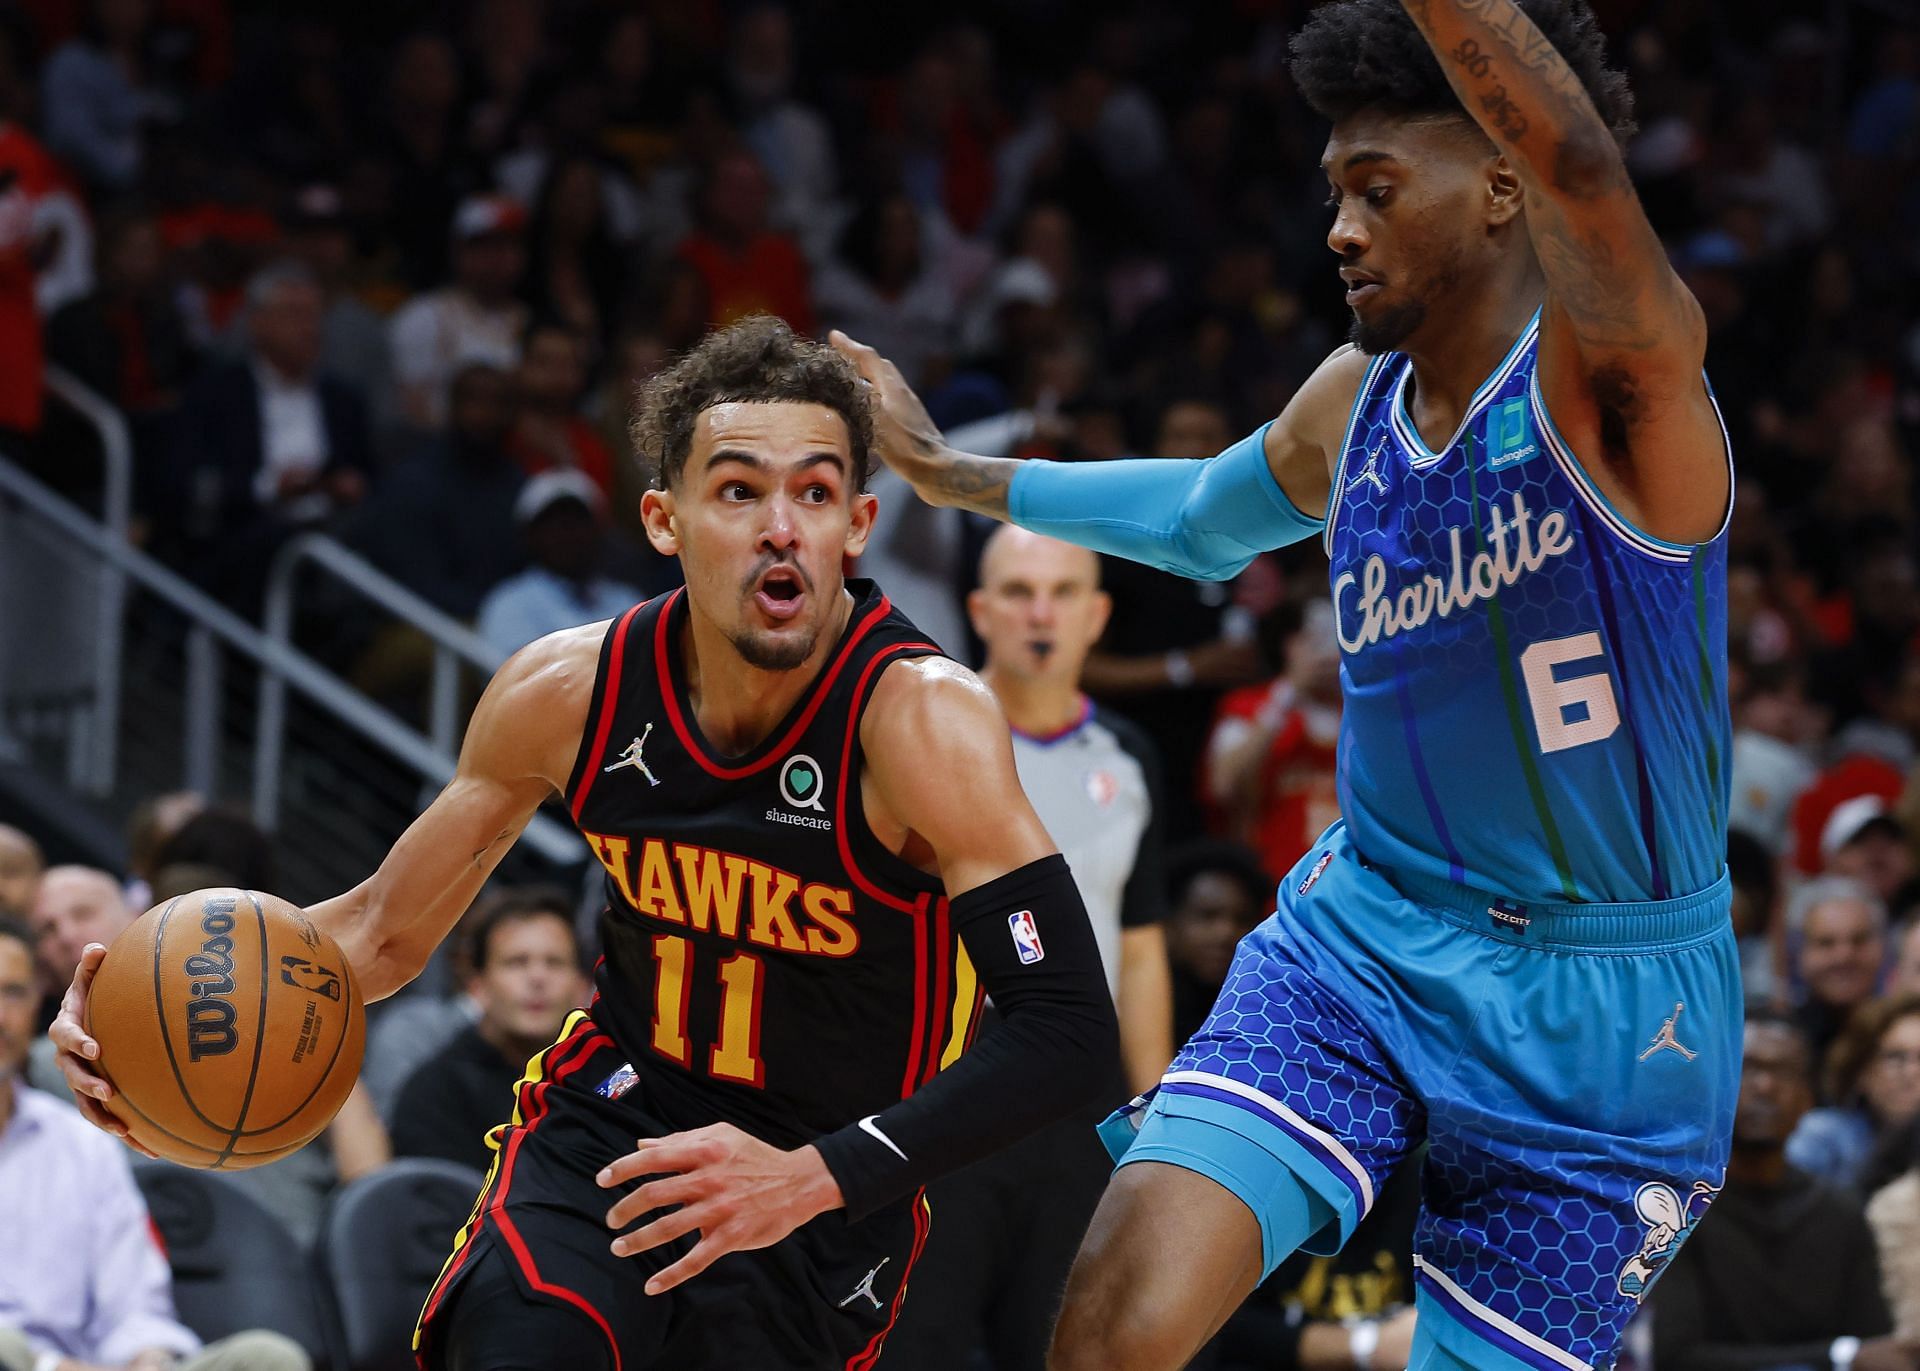 Trae Young #11 of the Atlanta Hawks dribbles the ball against Jalen McDaniels #6 of the Charlotte Hornets during the second half at State Farm Arena on April 13, 2022 in Atlanta, Georg